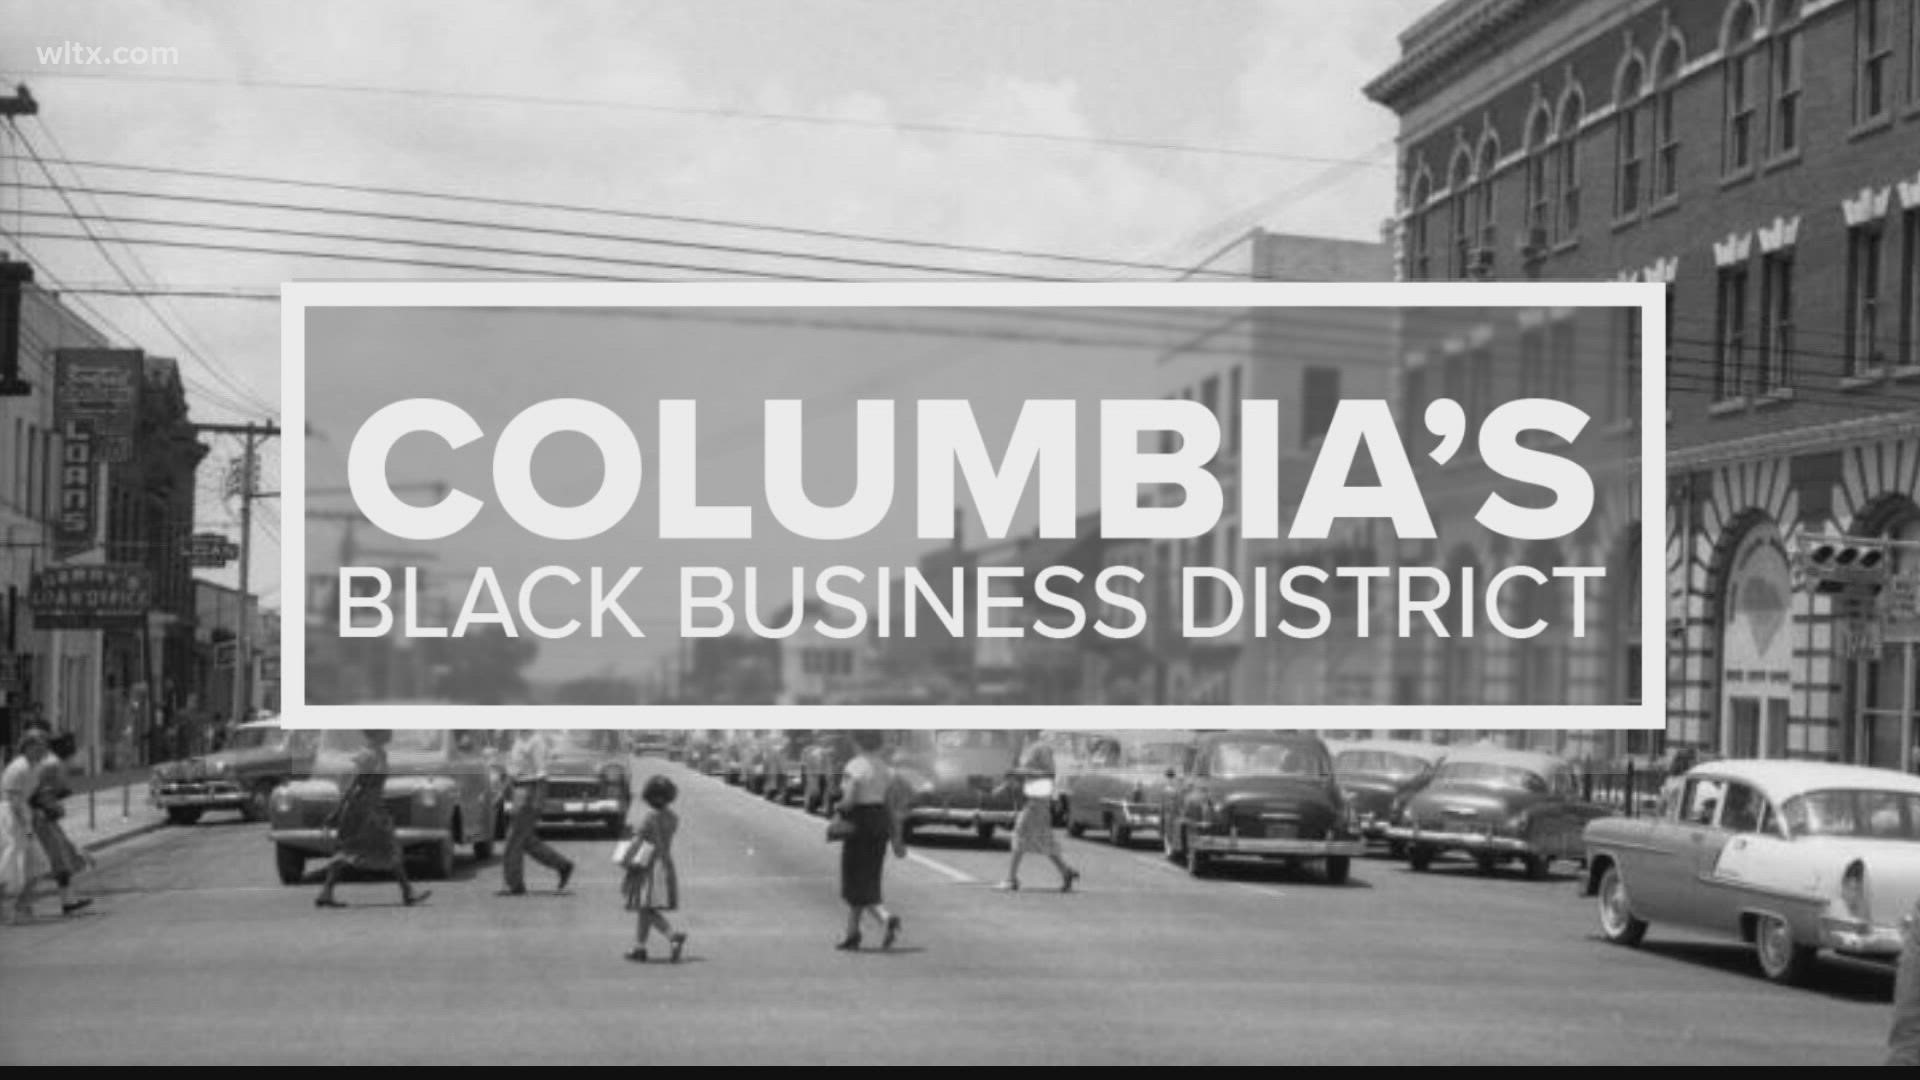 Brandon Taylor looks share the stories of two women as they recount their experiences in Columbia's Black Business District.